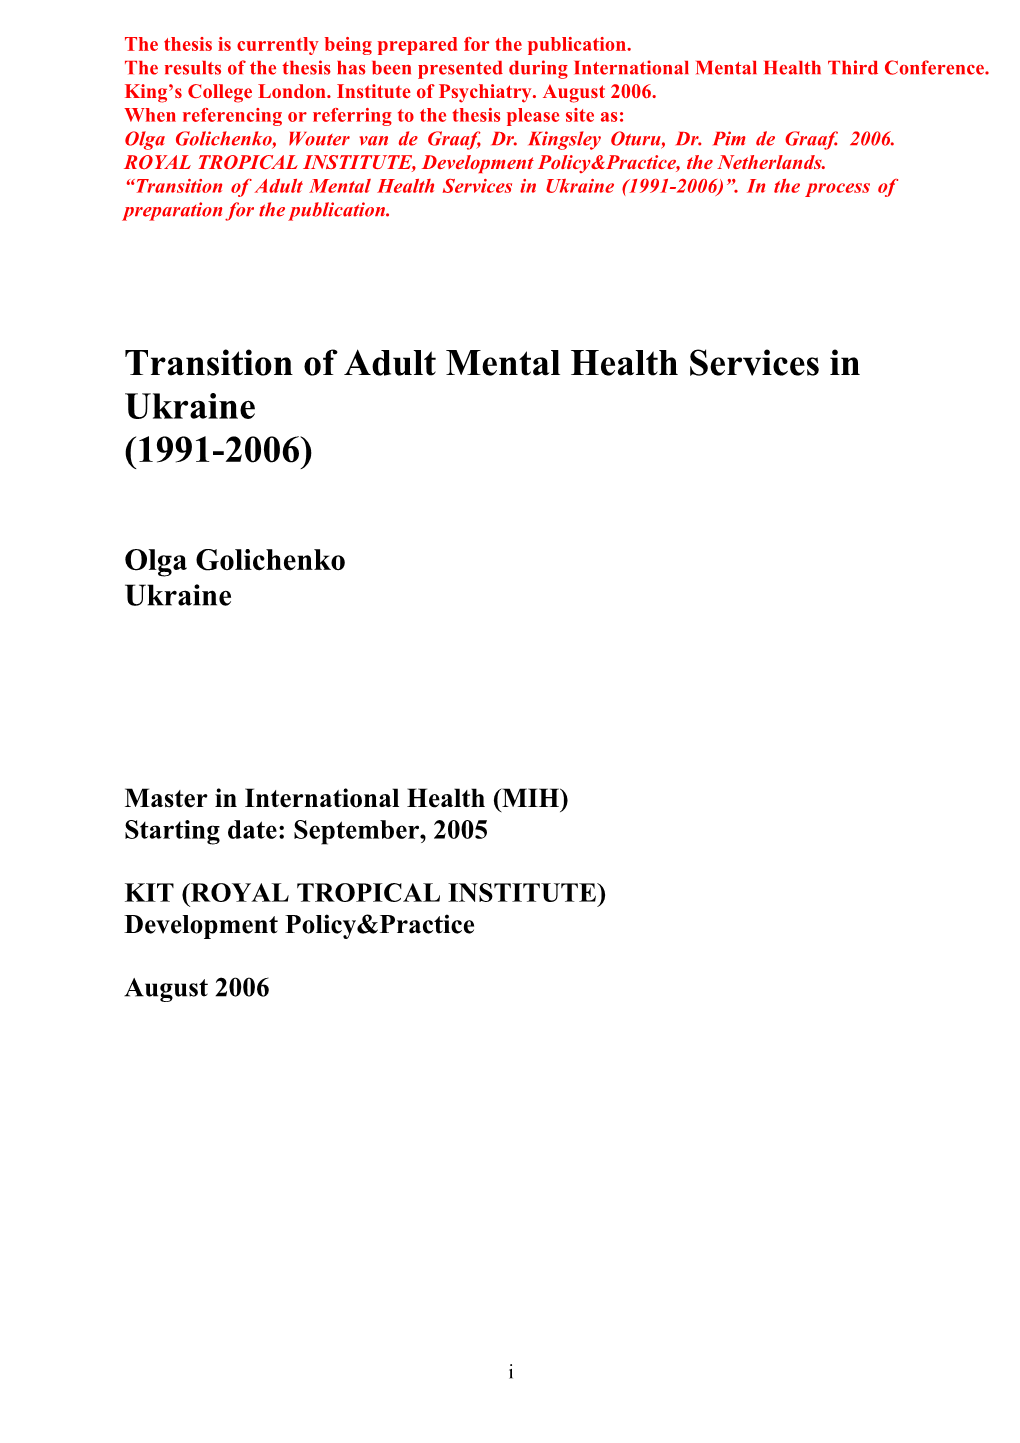 Transition of Adult Mental Health Services in Ukraine